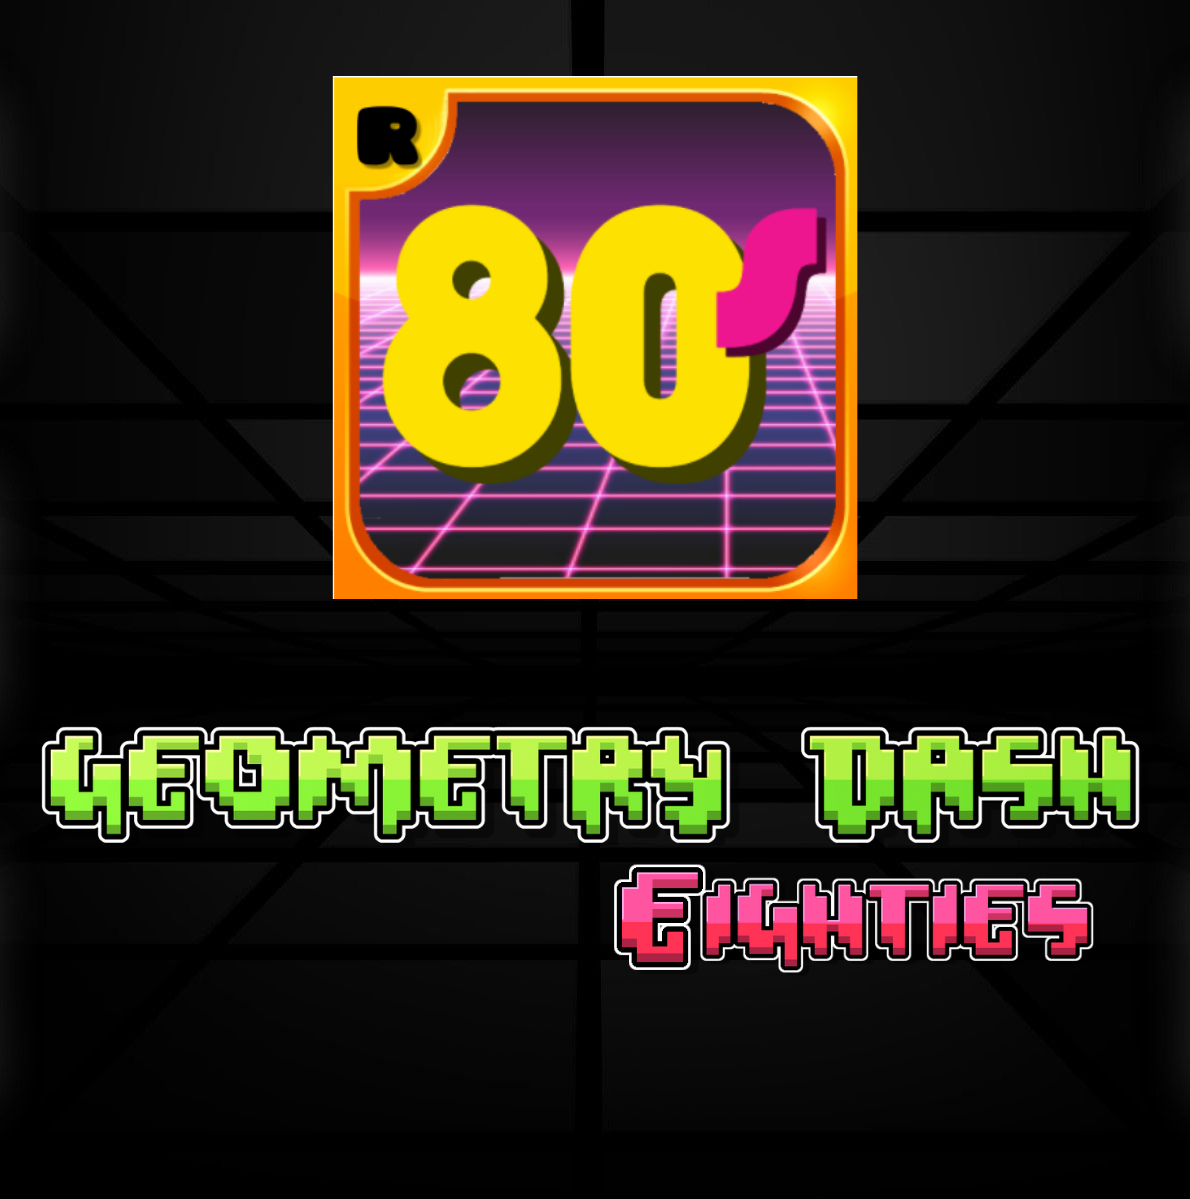 how to geometry dash for free ios